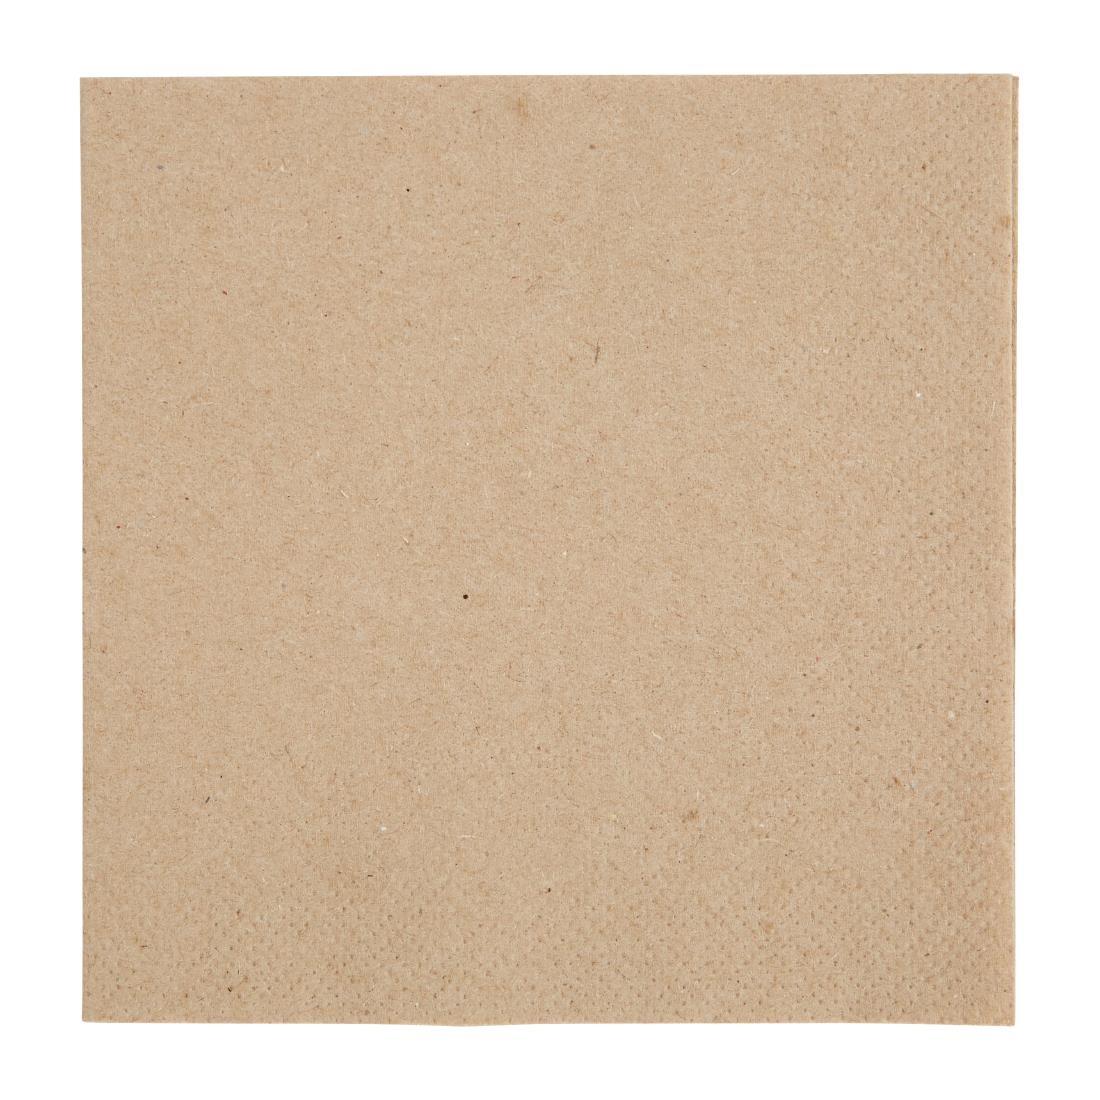 Fiesta Recyclable Recycled Cocktail Napkin Kraft 24x24cm 2ply 1/4 Fold (Pack of 4000) - FE217  - 1